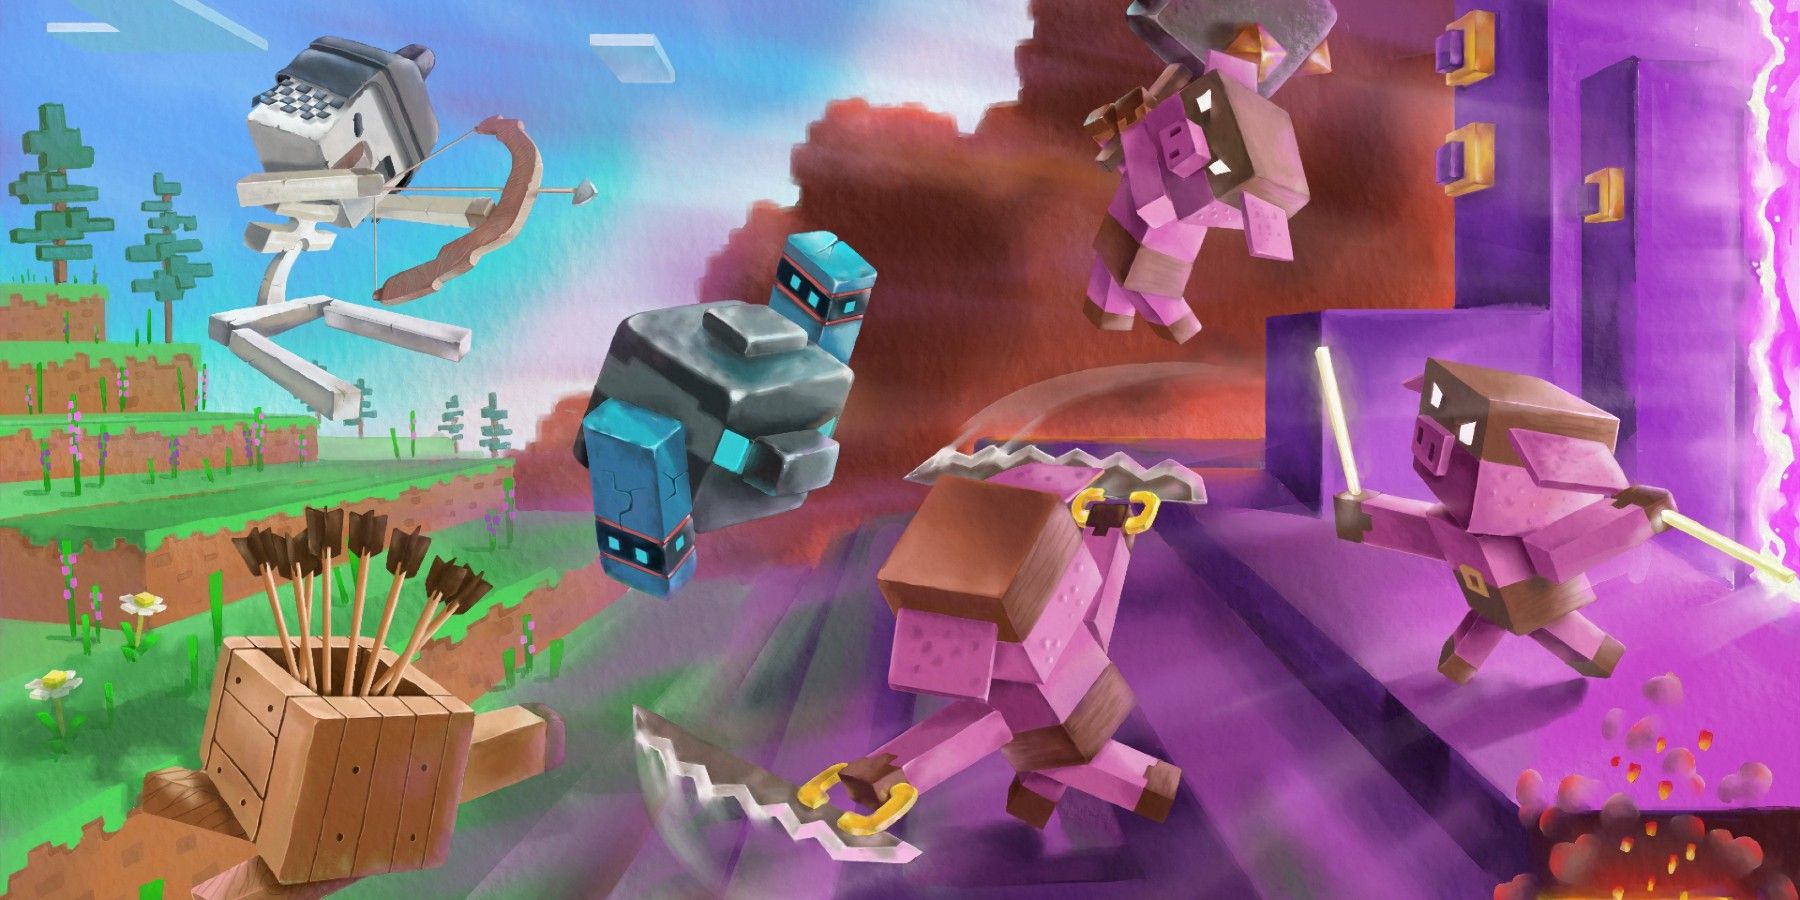 MINECRAFT LEGENDS: Everything To Know - Secrets, New Mobs, + More! 